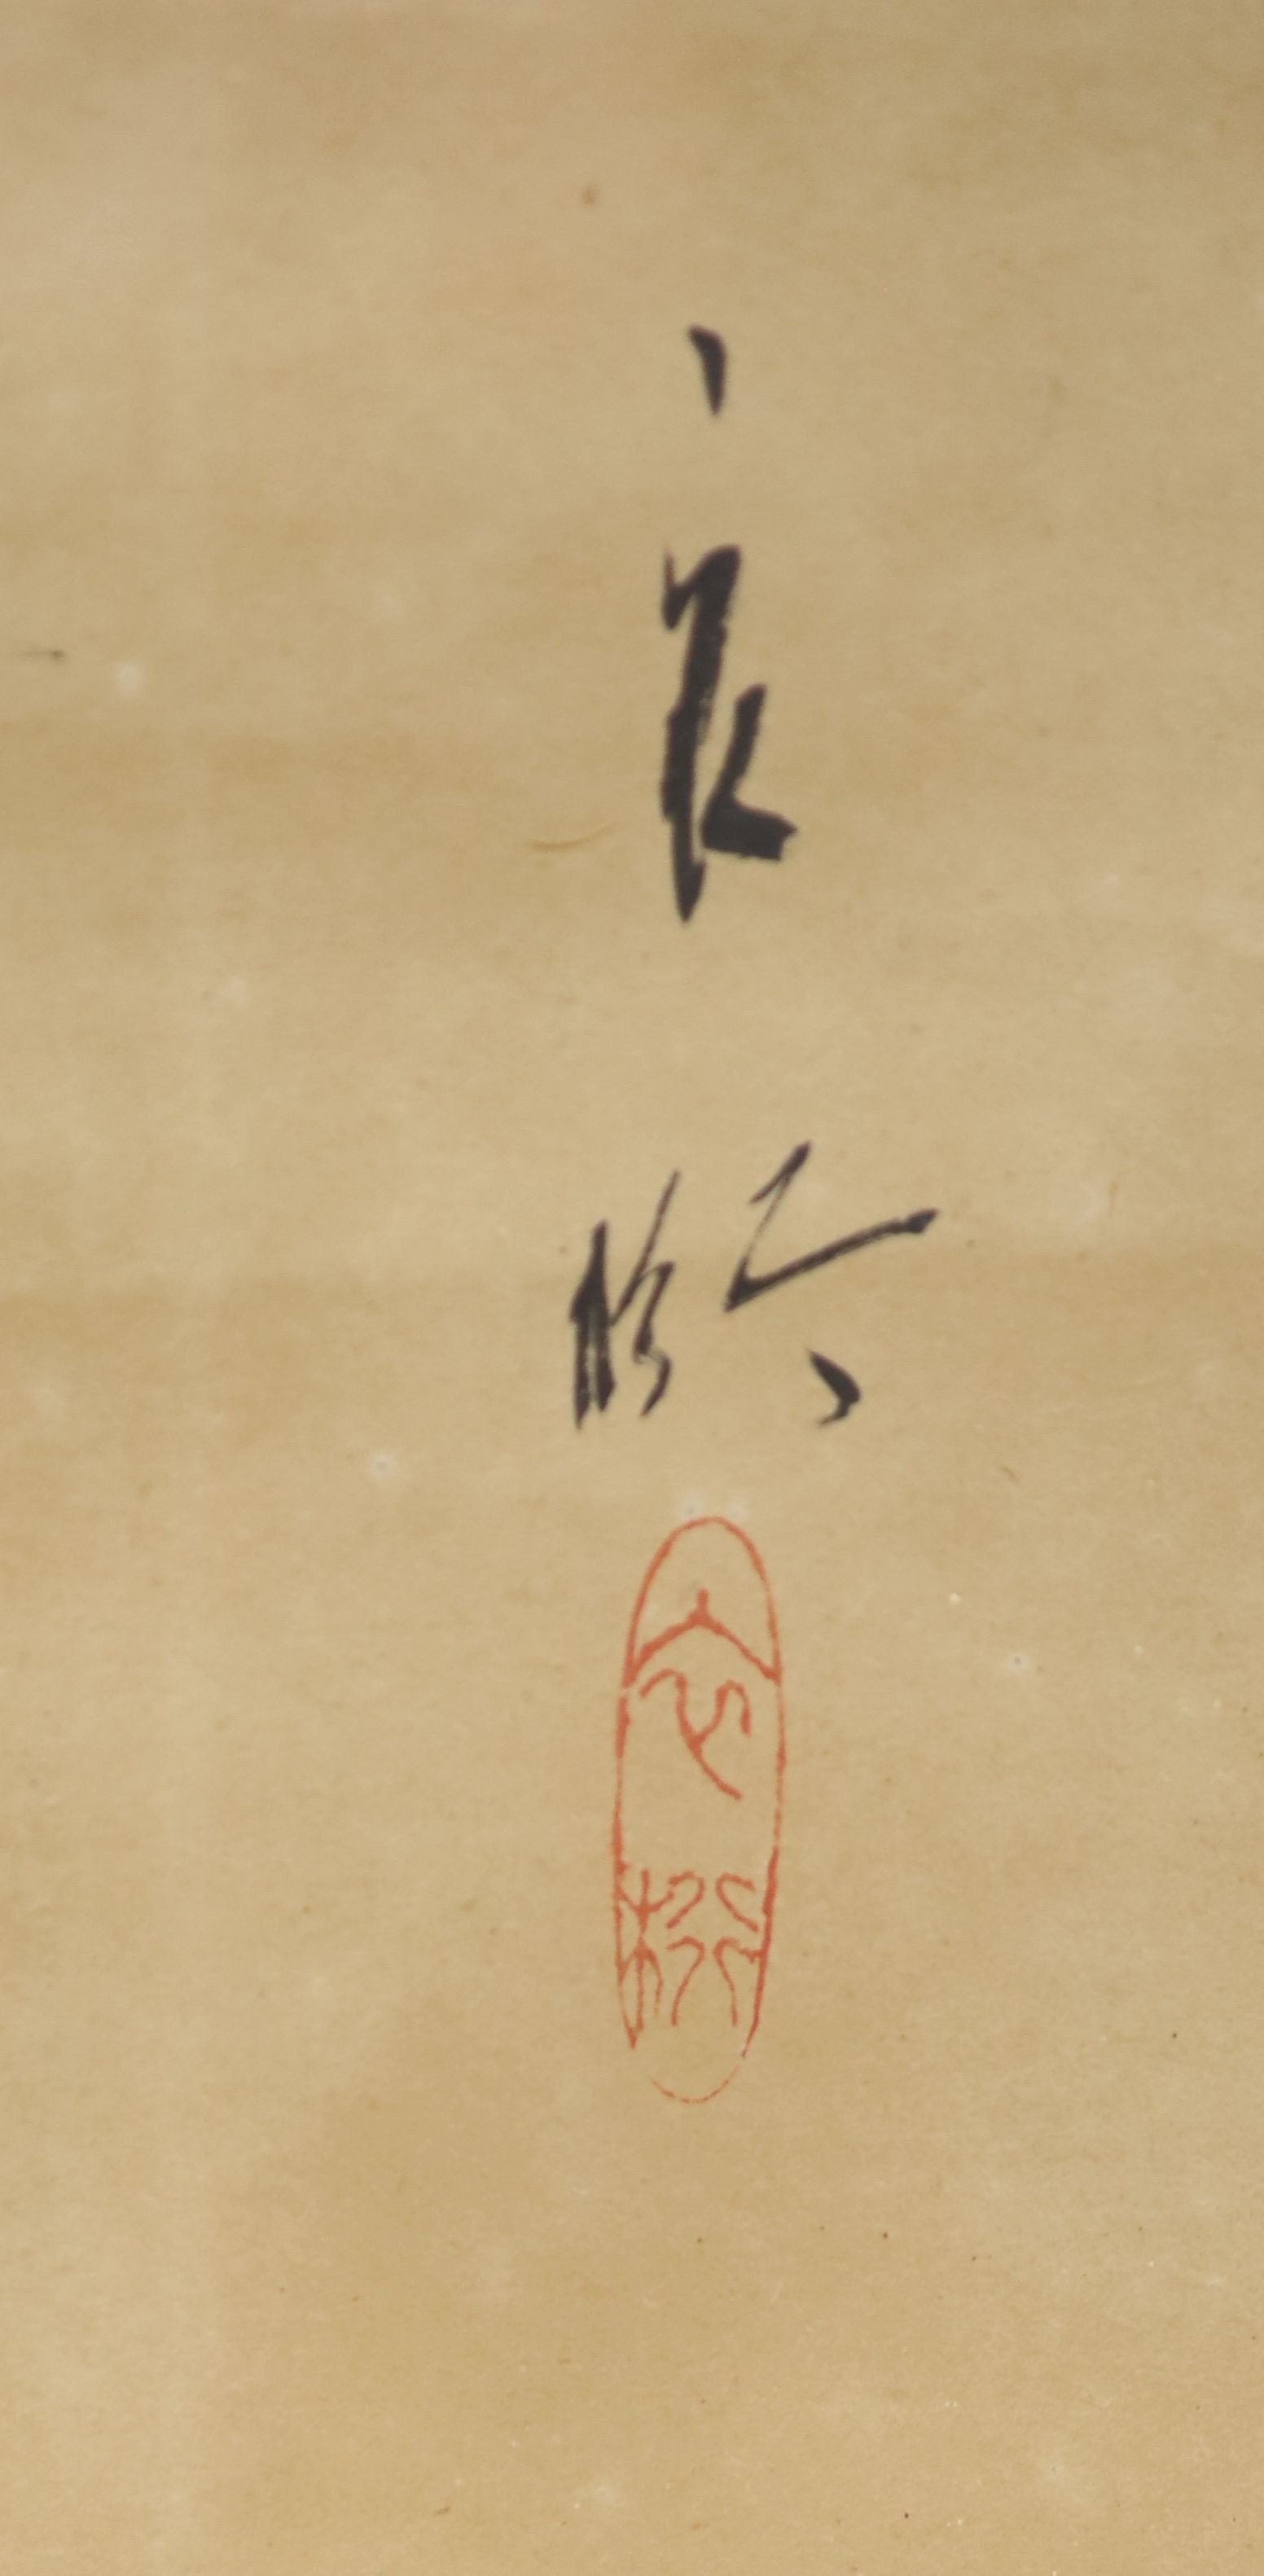 A 19th century Japanese ink painting on paper of a dog, image 96.5 x 32 cm